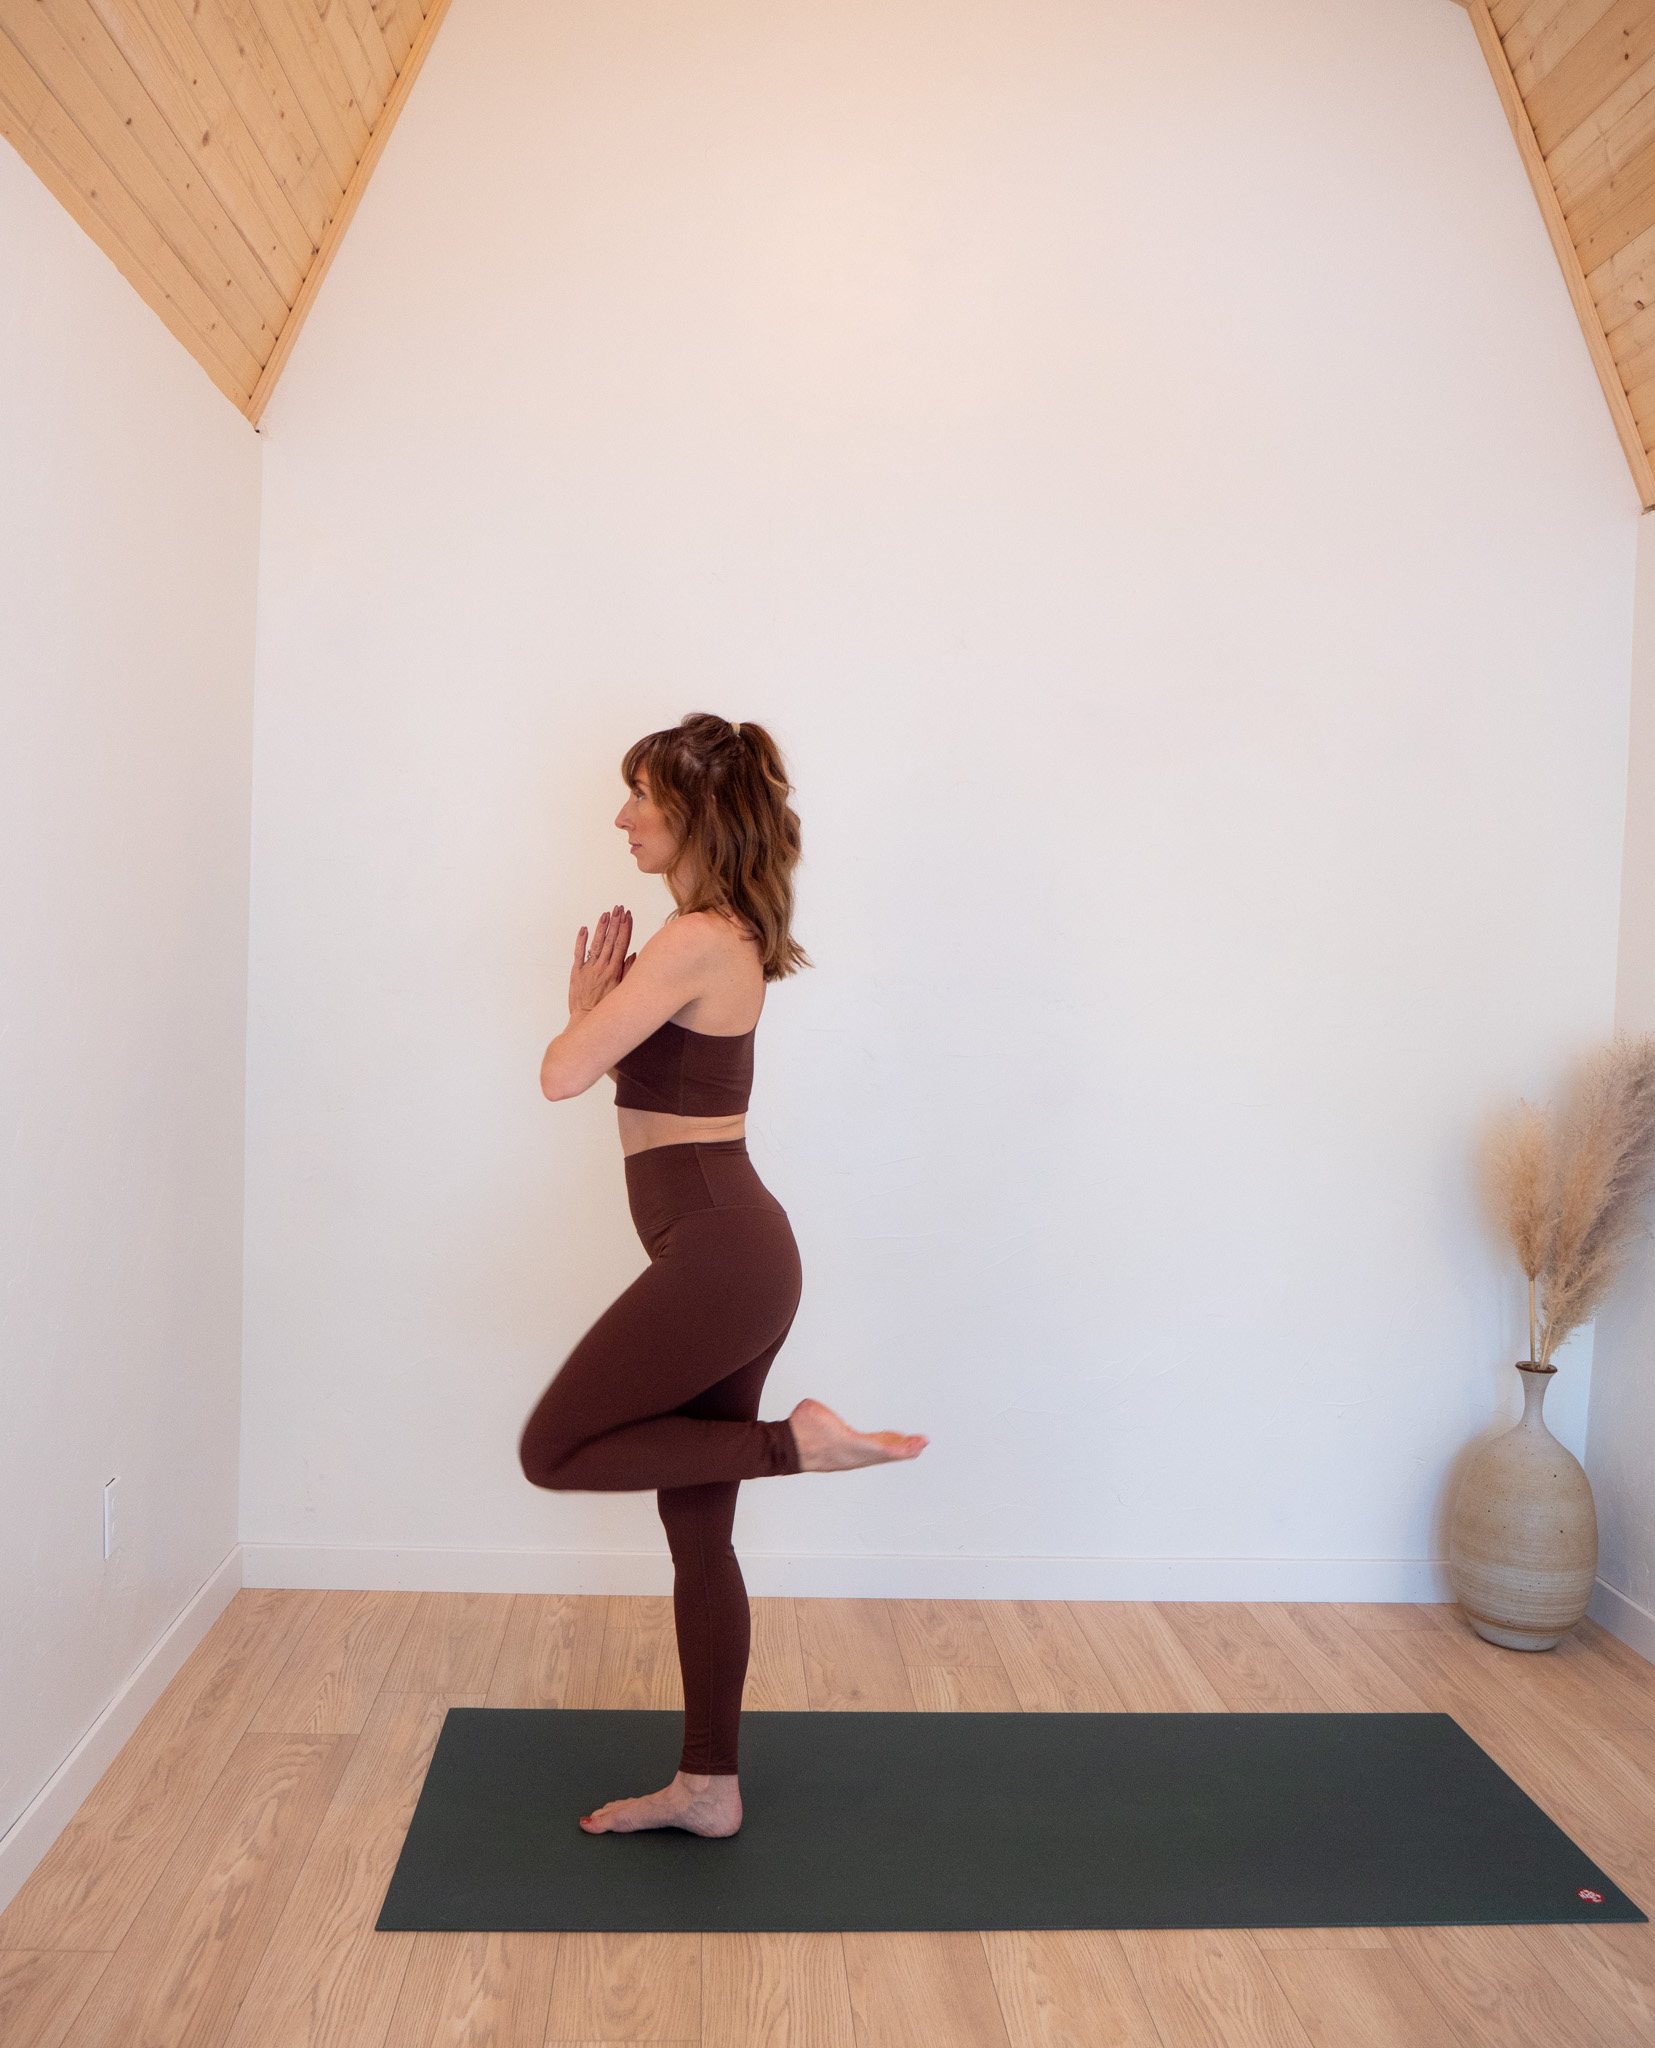 A woman in a brown yoga outfit performs a tree pose on a green mat in a serene, minimally decorated room with a slanted ceiling.